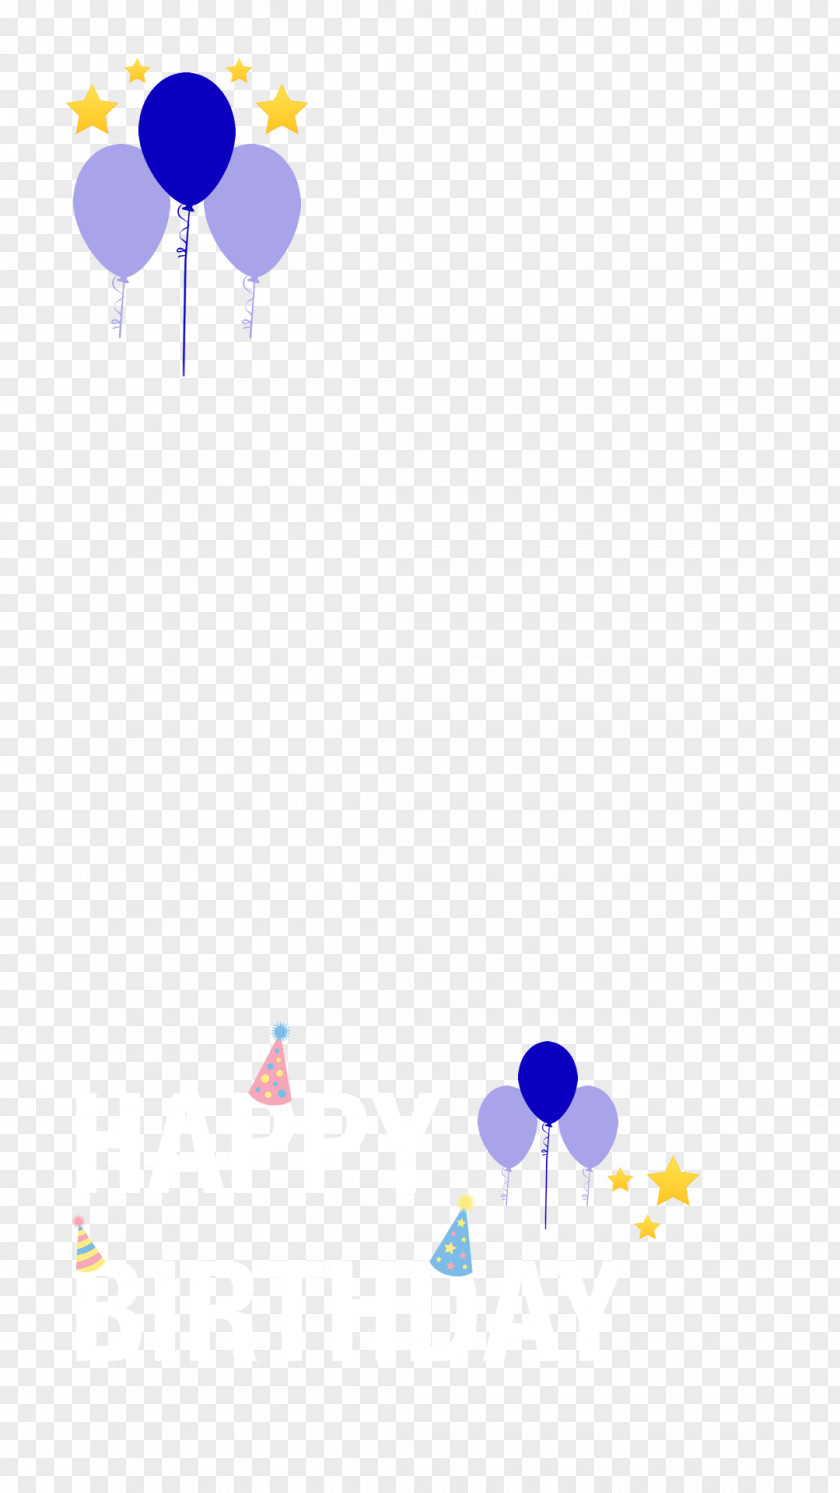 Birthday Hat Balloon Party Graphic Design PNG